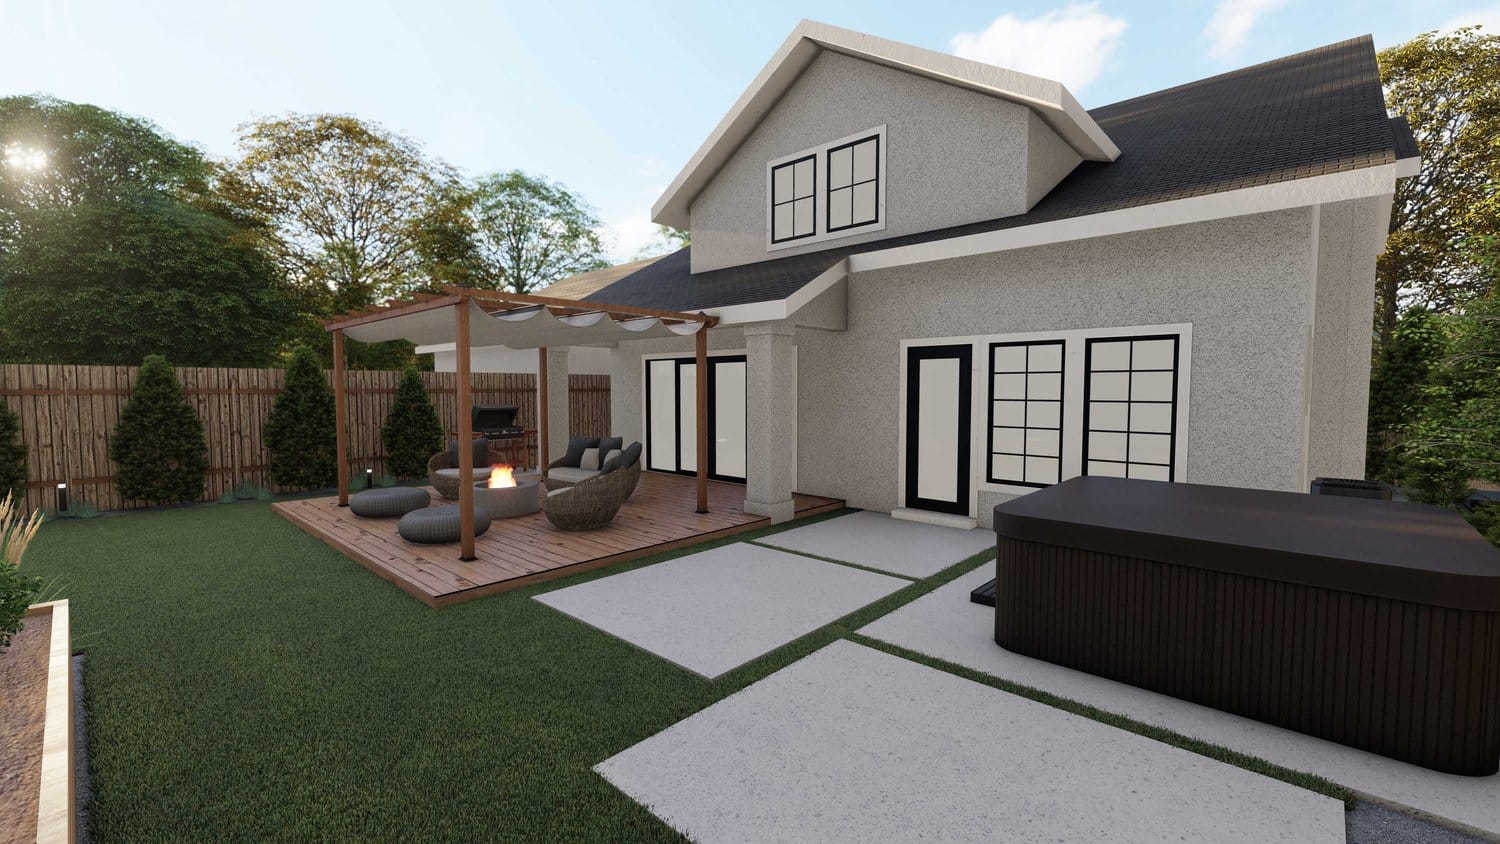 Twin Falls front yard showing patio with pergola over fire pit seating area